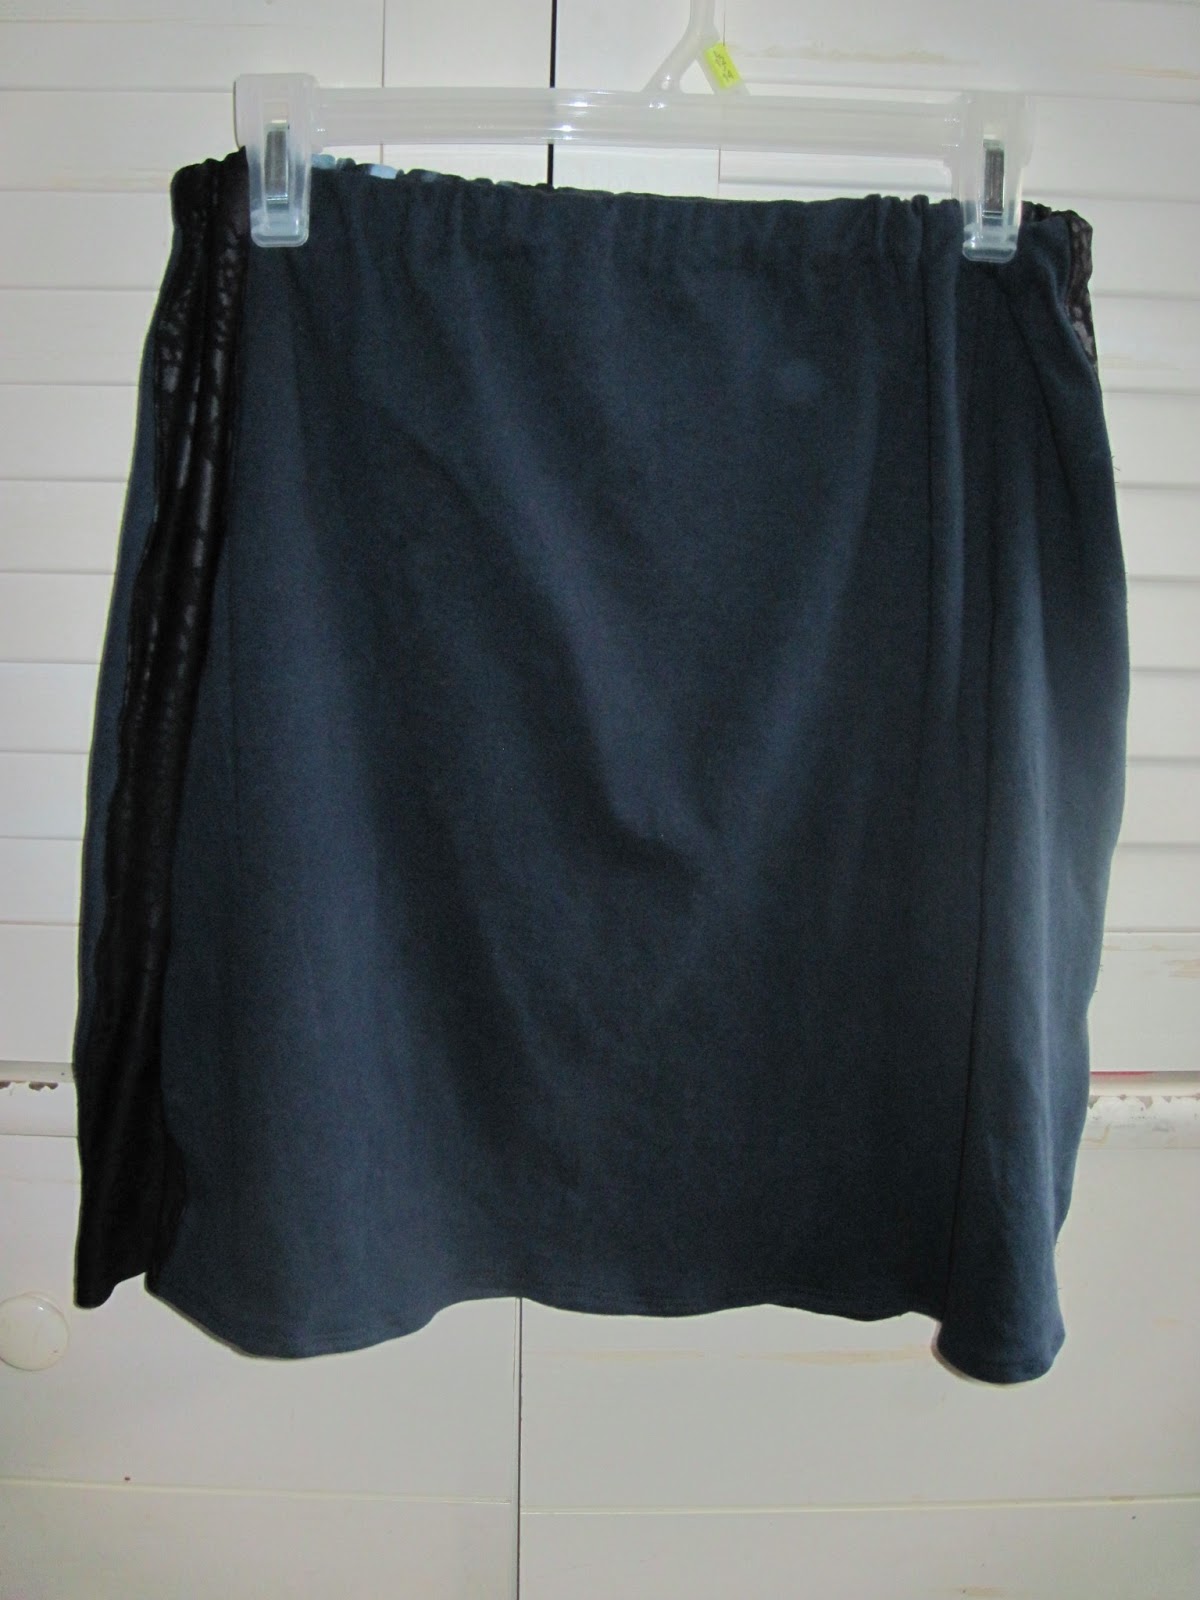 Refashion Co-op: New Skirts from T-shirts